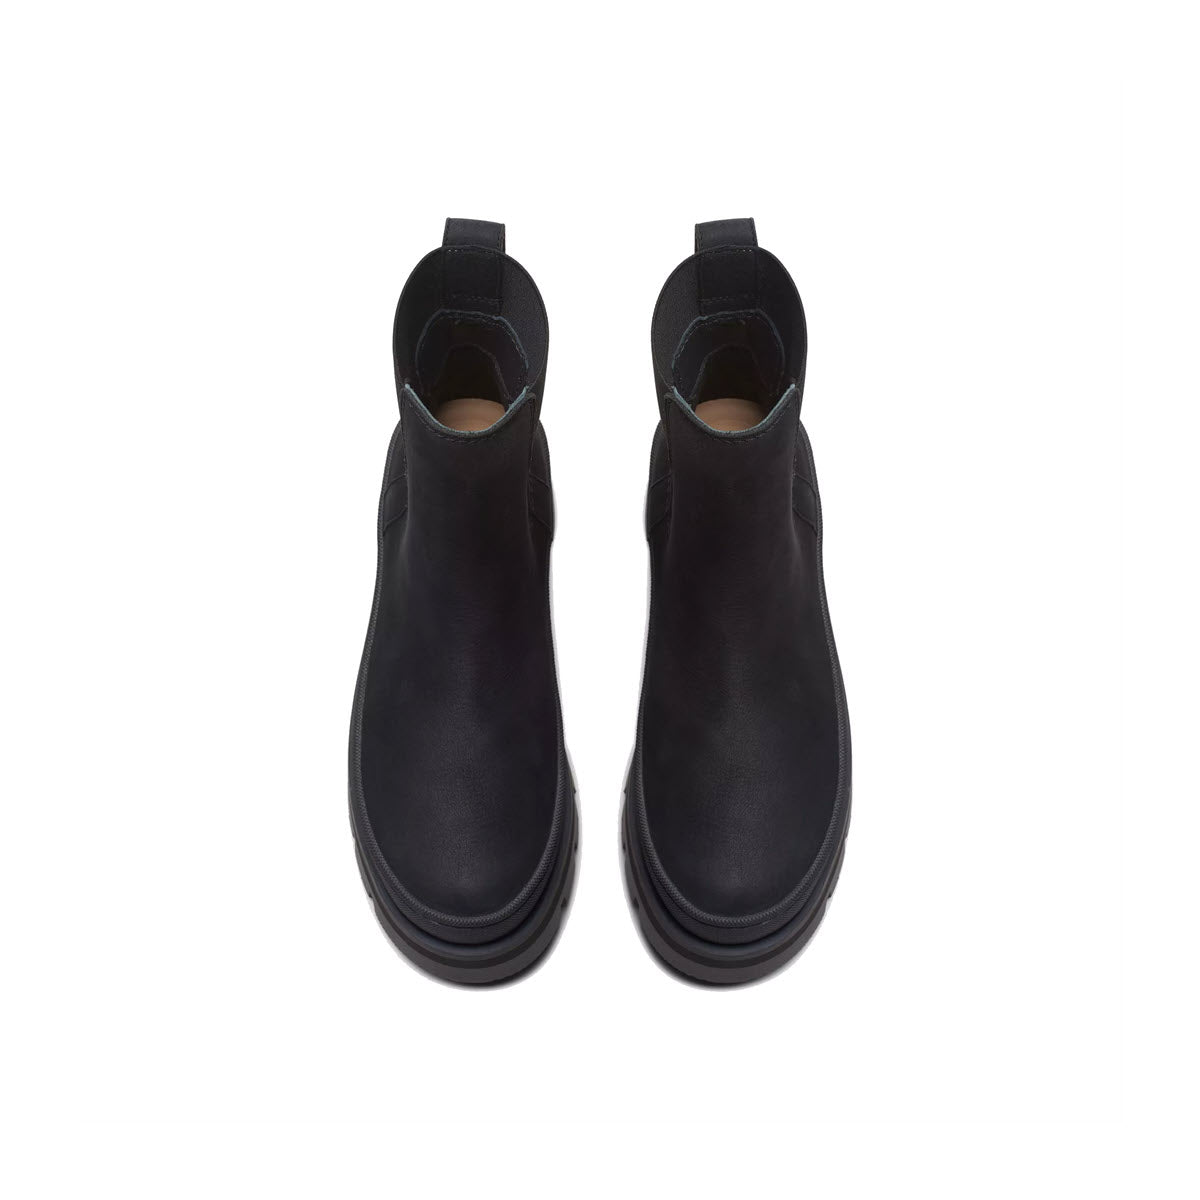 A pair of Clarks Orianna 2 Top Black women&#39;s leather lace-up ankle boots with pull tabs, viewed from the top on a white background.